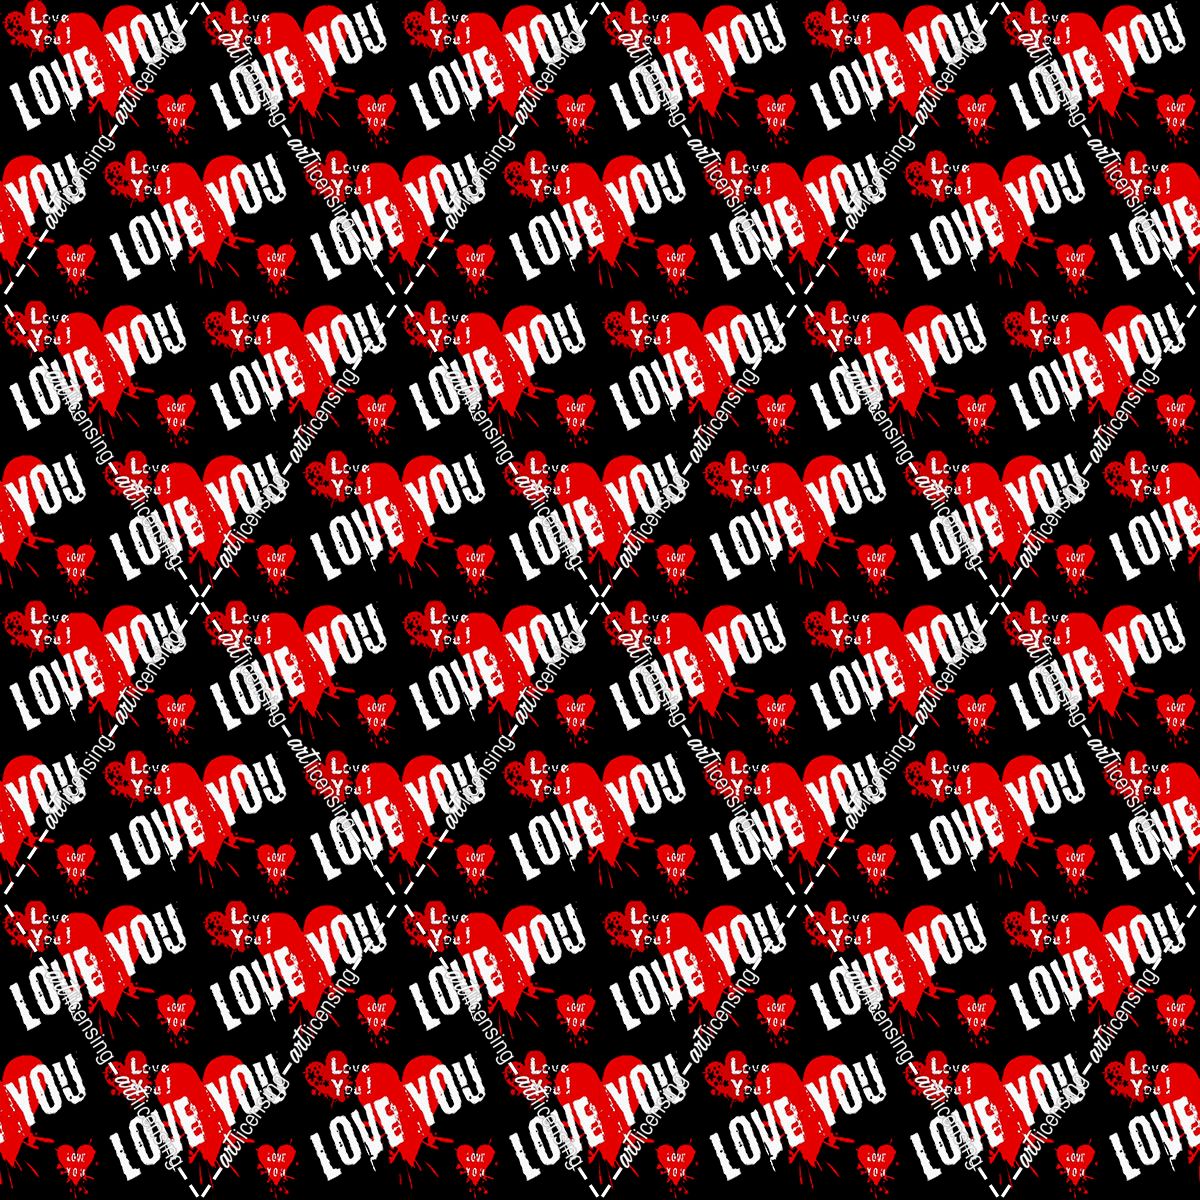 Love You 2_Repeat Pattern